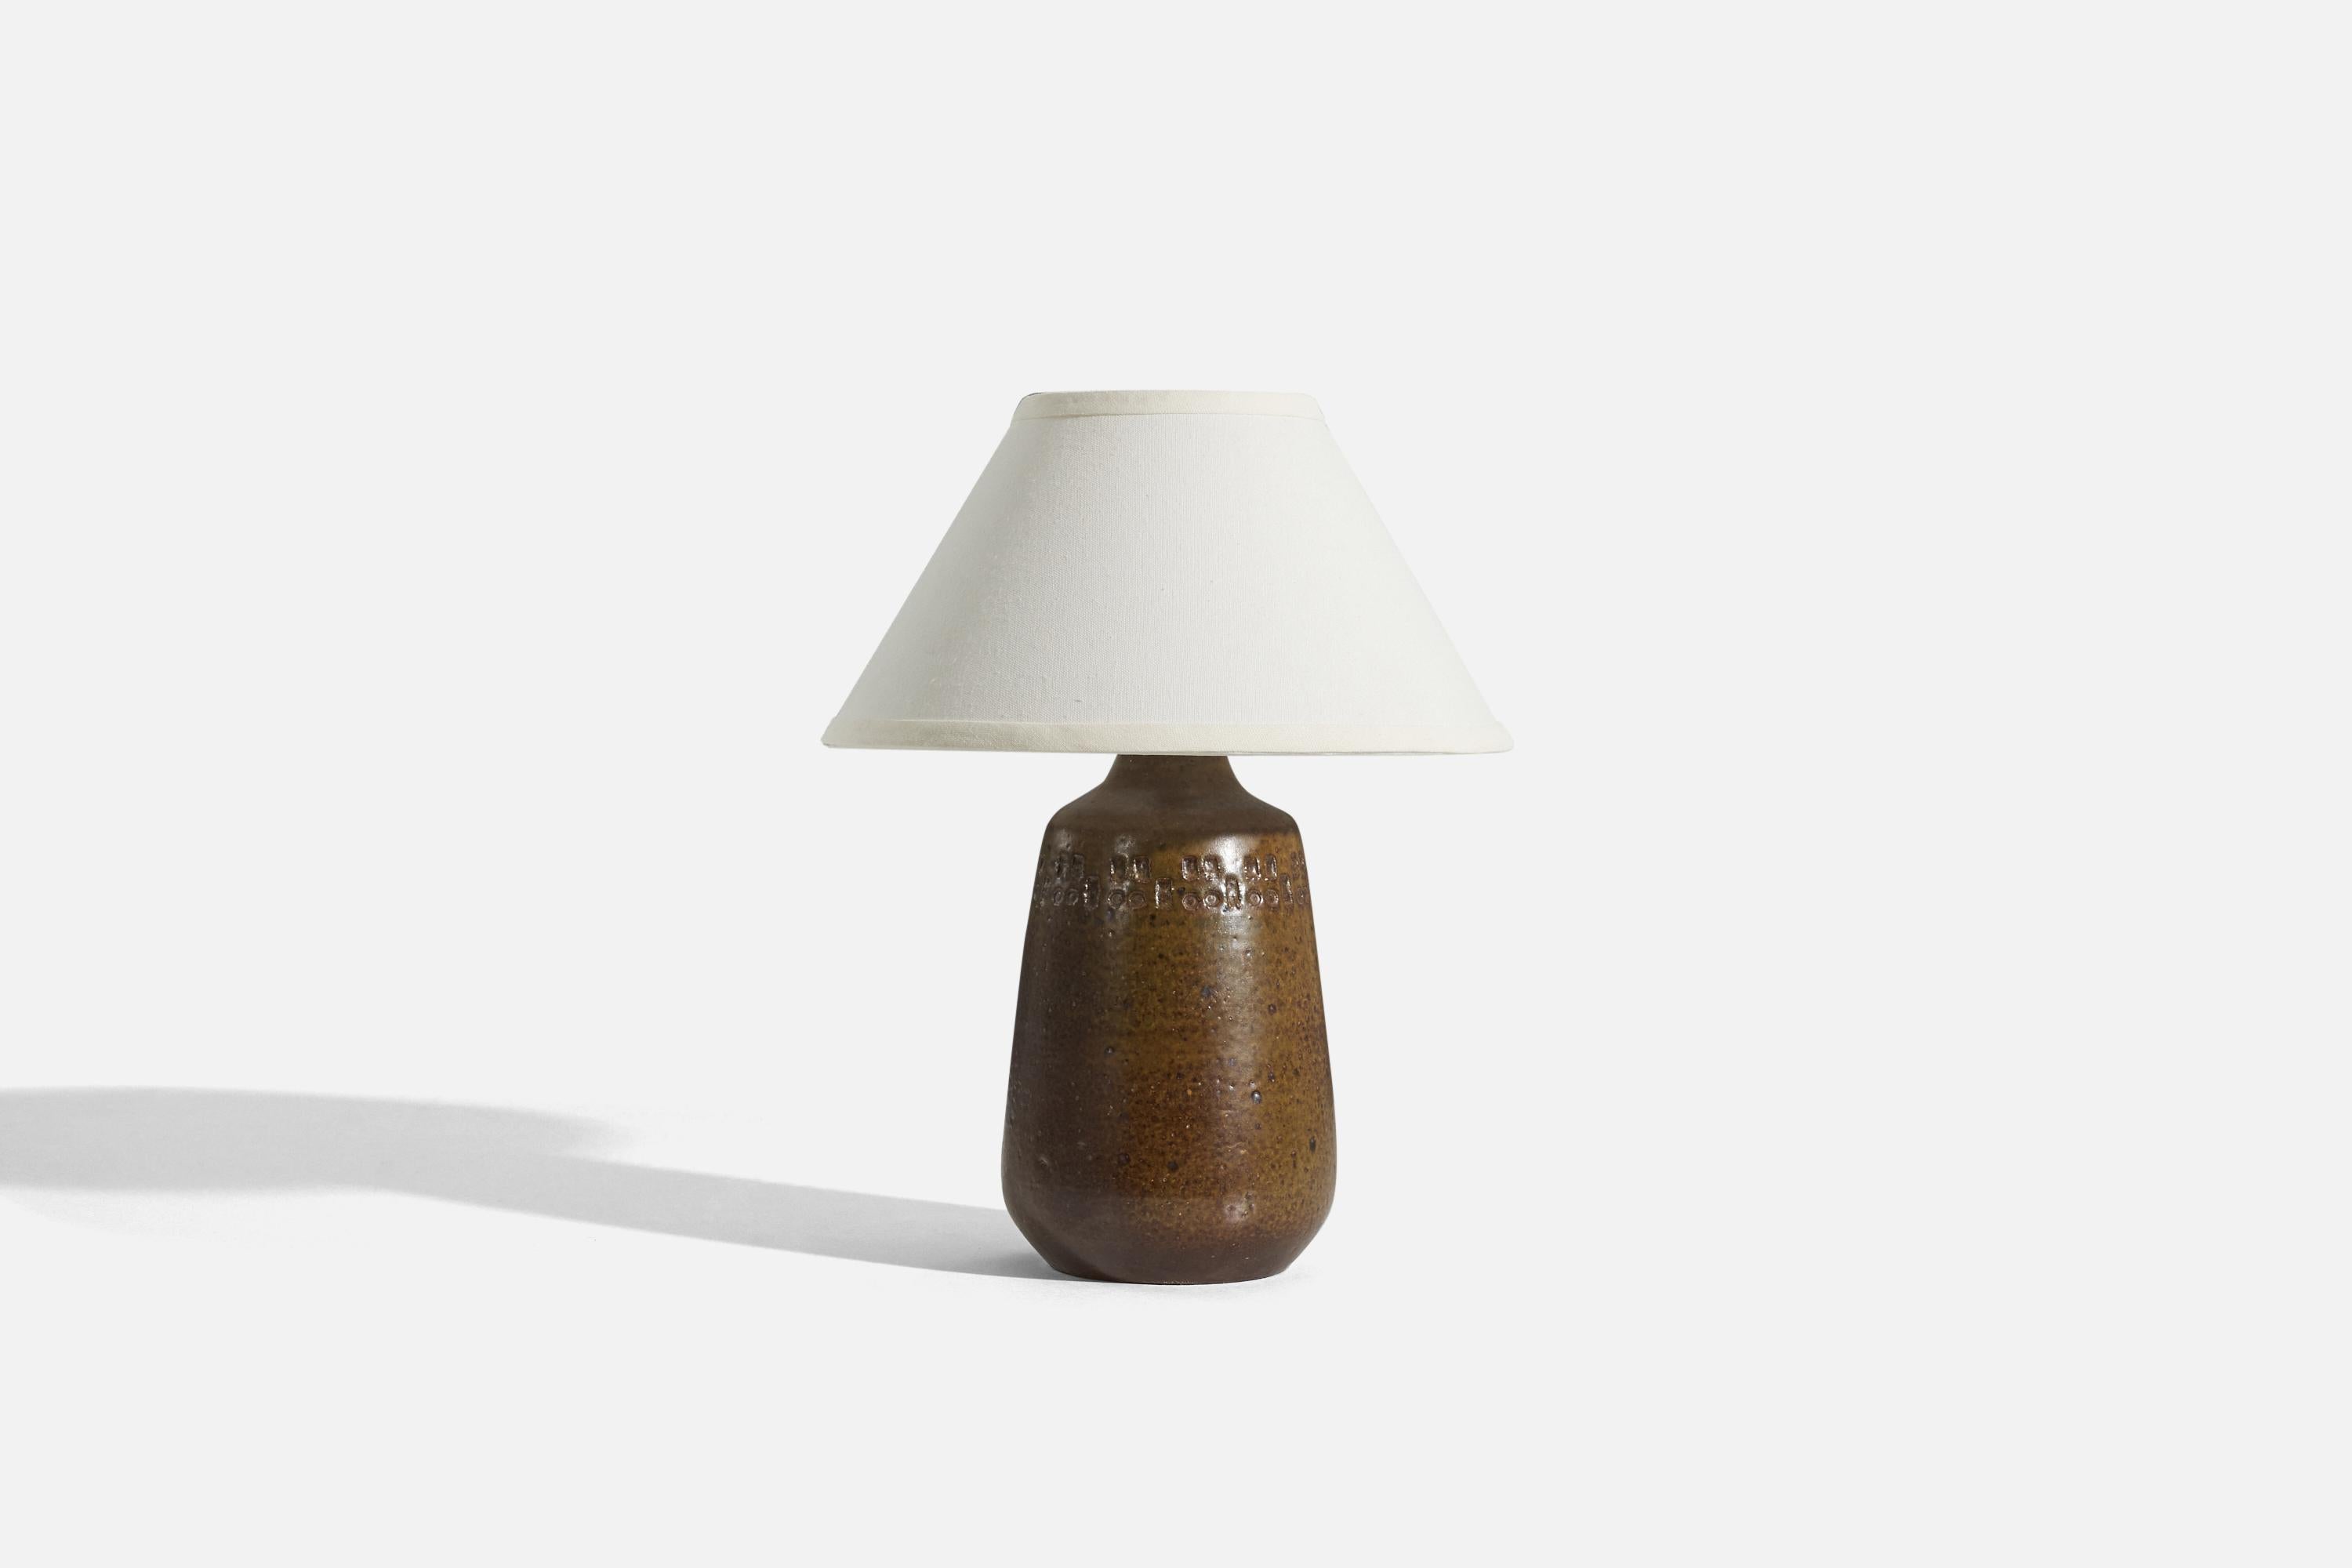 A brown glazed stoneware table lamp designed and produced by Yngve Blixt, Sweden, 1960s. 

Sold without lampshade. 
Dimensions of Lamp (inches) : 12.5625 x 5.75 x 5.75 (H x W x D)
Dimensions of Shade (inches) : 5.25 x 12.25 x 7.25 (T x B x